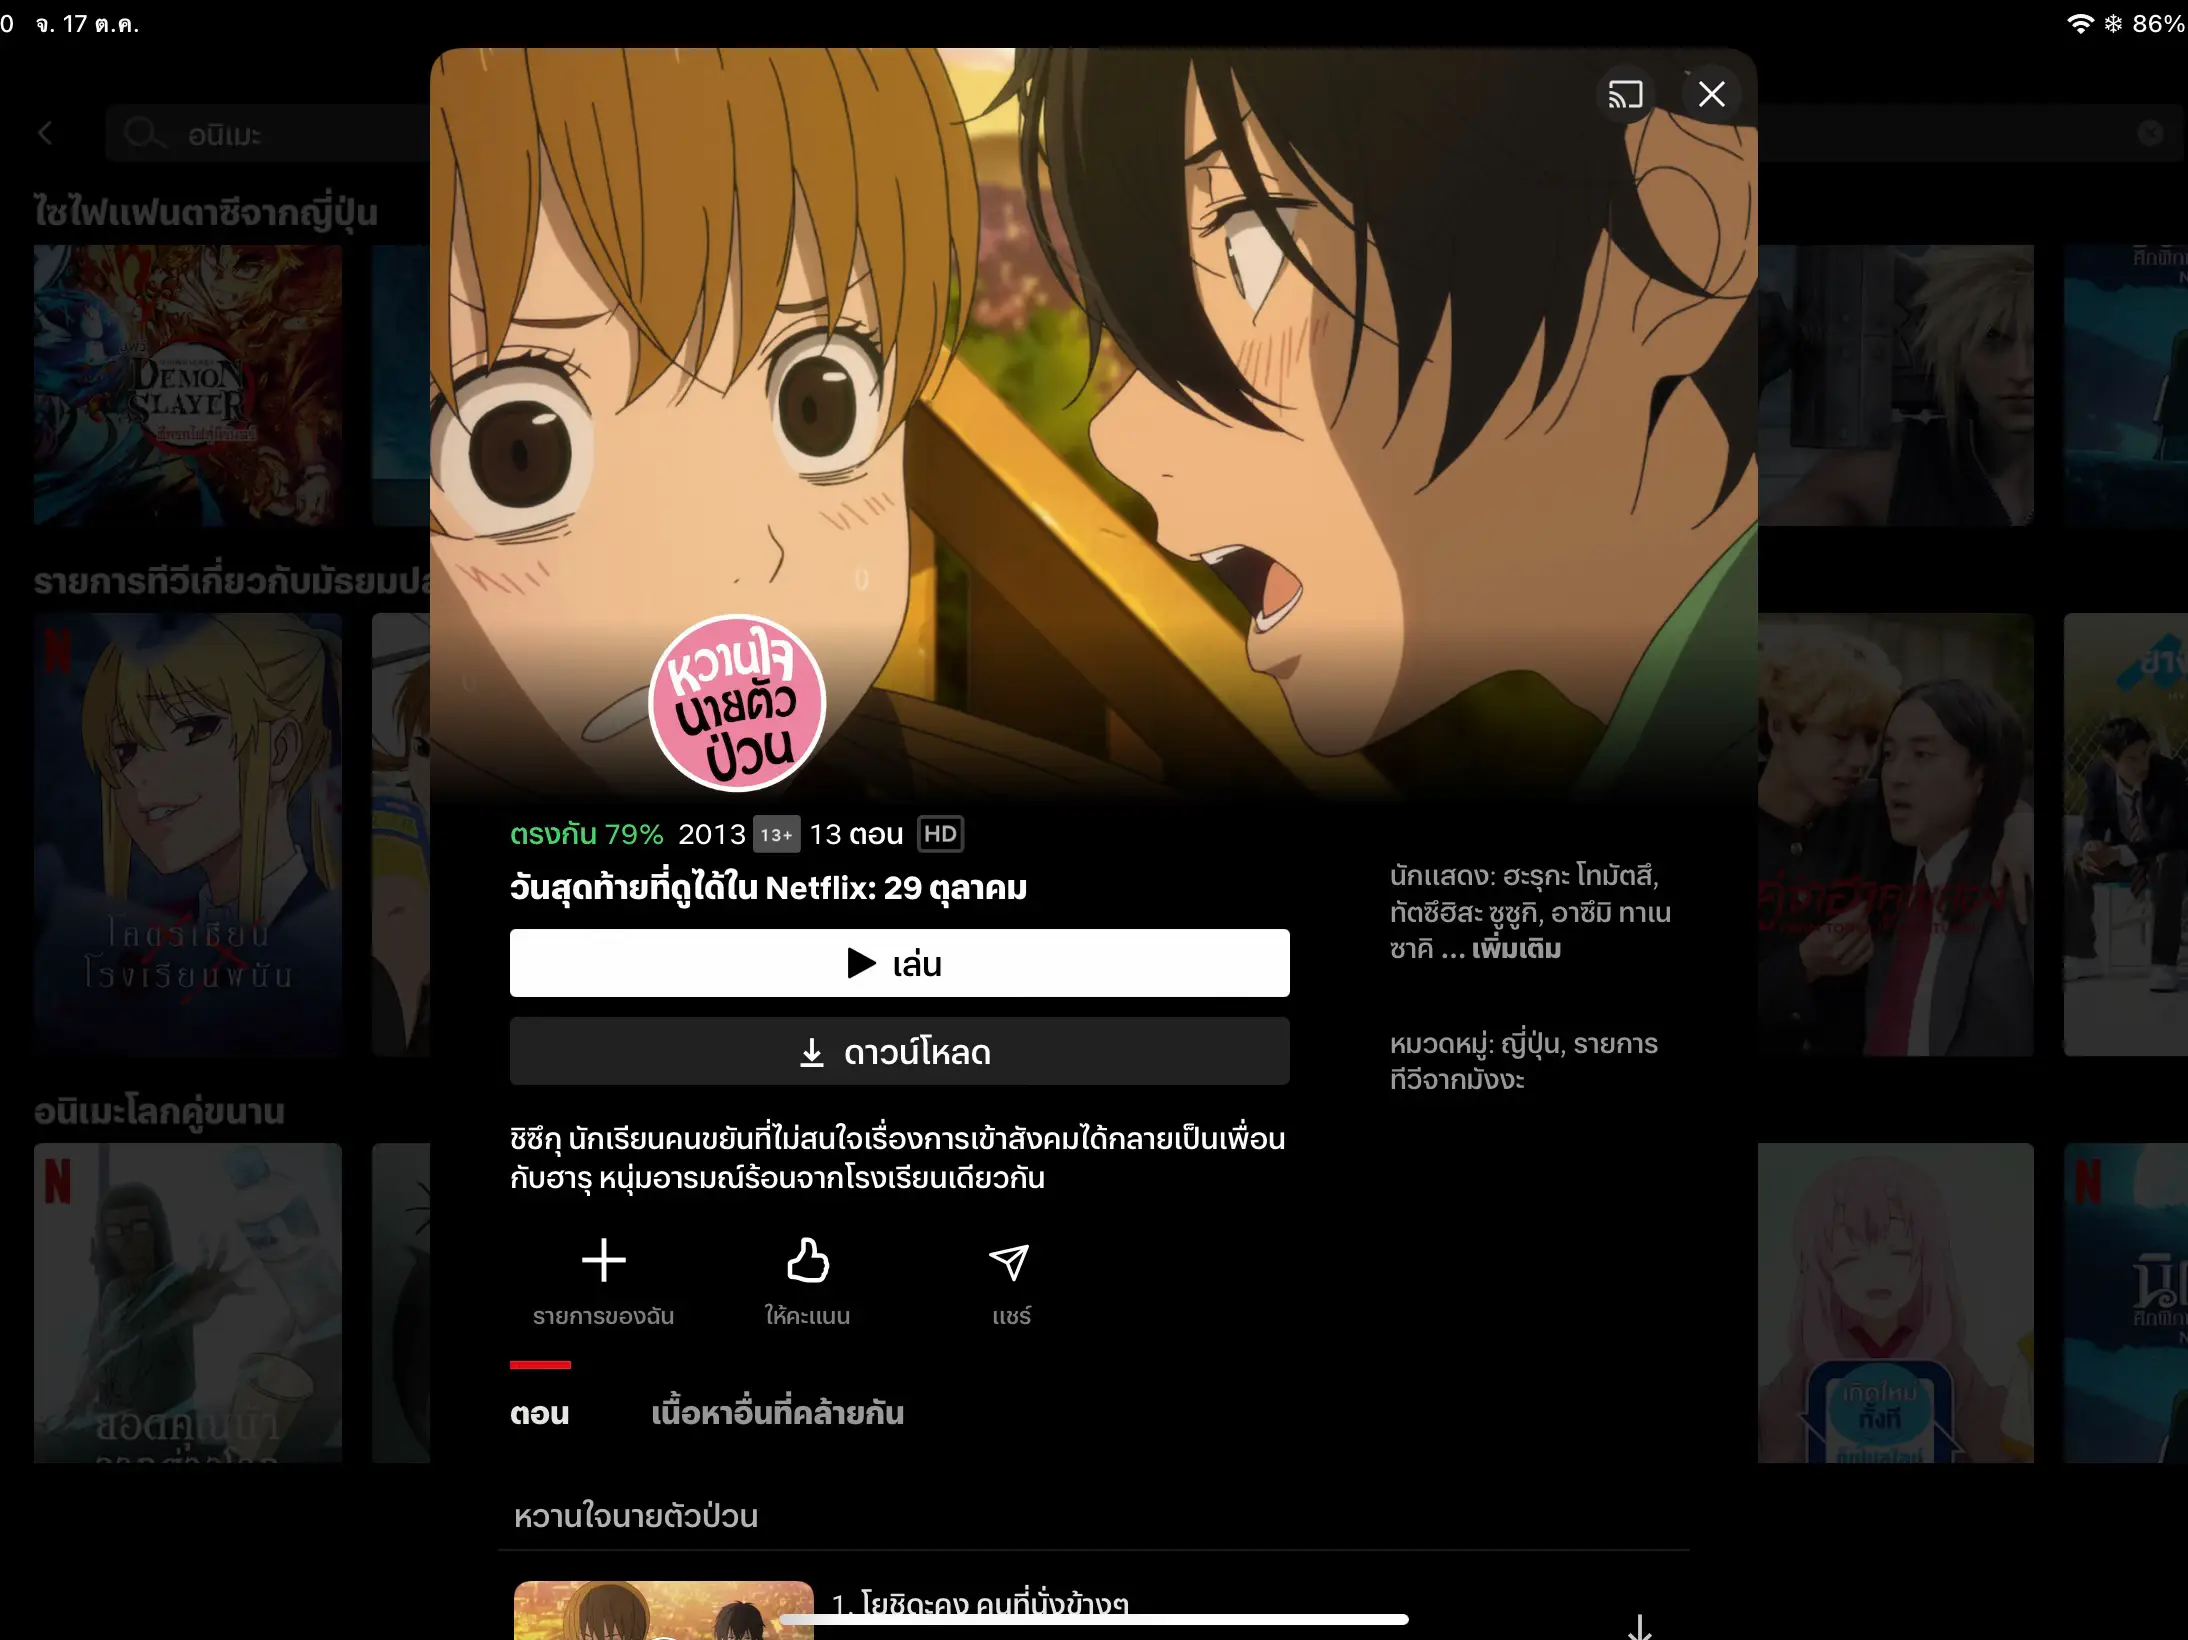 Introducing Anime on Netflix Don't Miss!, Gallery posted by Nutji